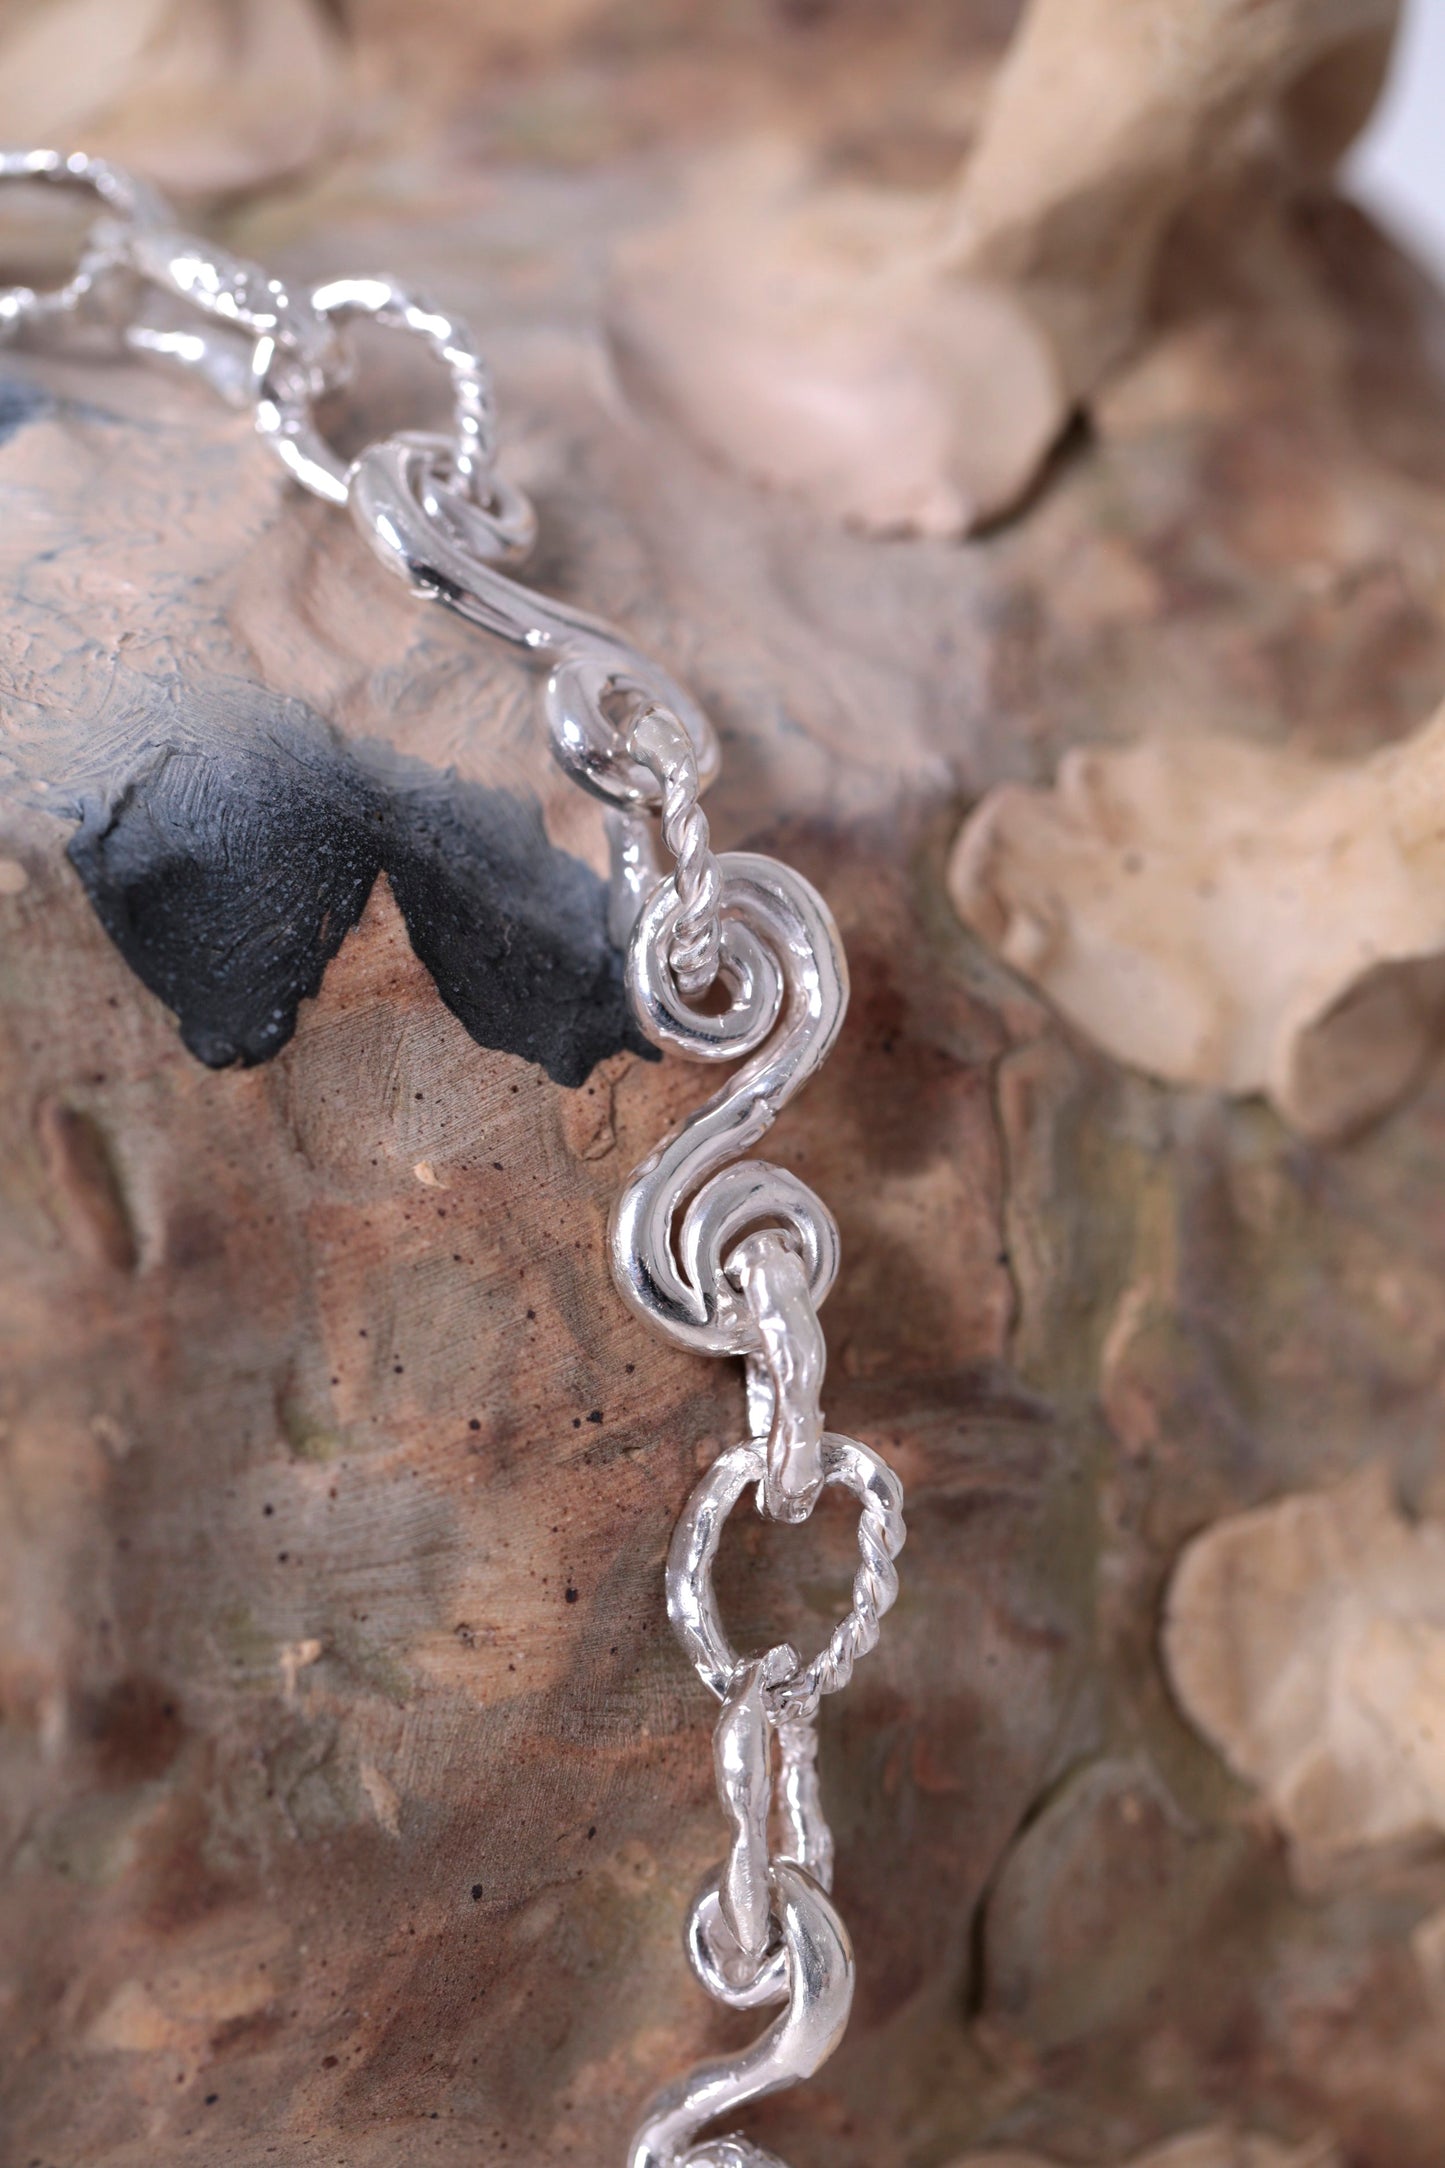 Detail of Braided Waves Necklace by CLARK in Sterling Silver. Pictured is an organic spiraling chain link finished in high polish. This necklace is a love letter to the ocean floor, a tribute to its beauty, mystery and forgotten treasures. It is a one of a kind necklace, created in Brooklyn using the lost wax casting method. 